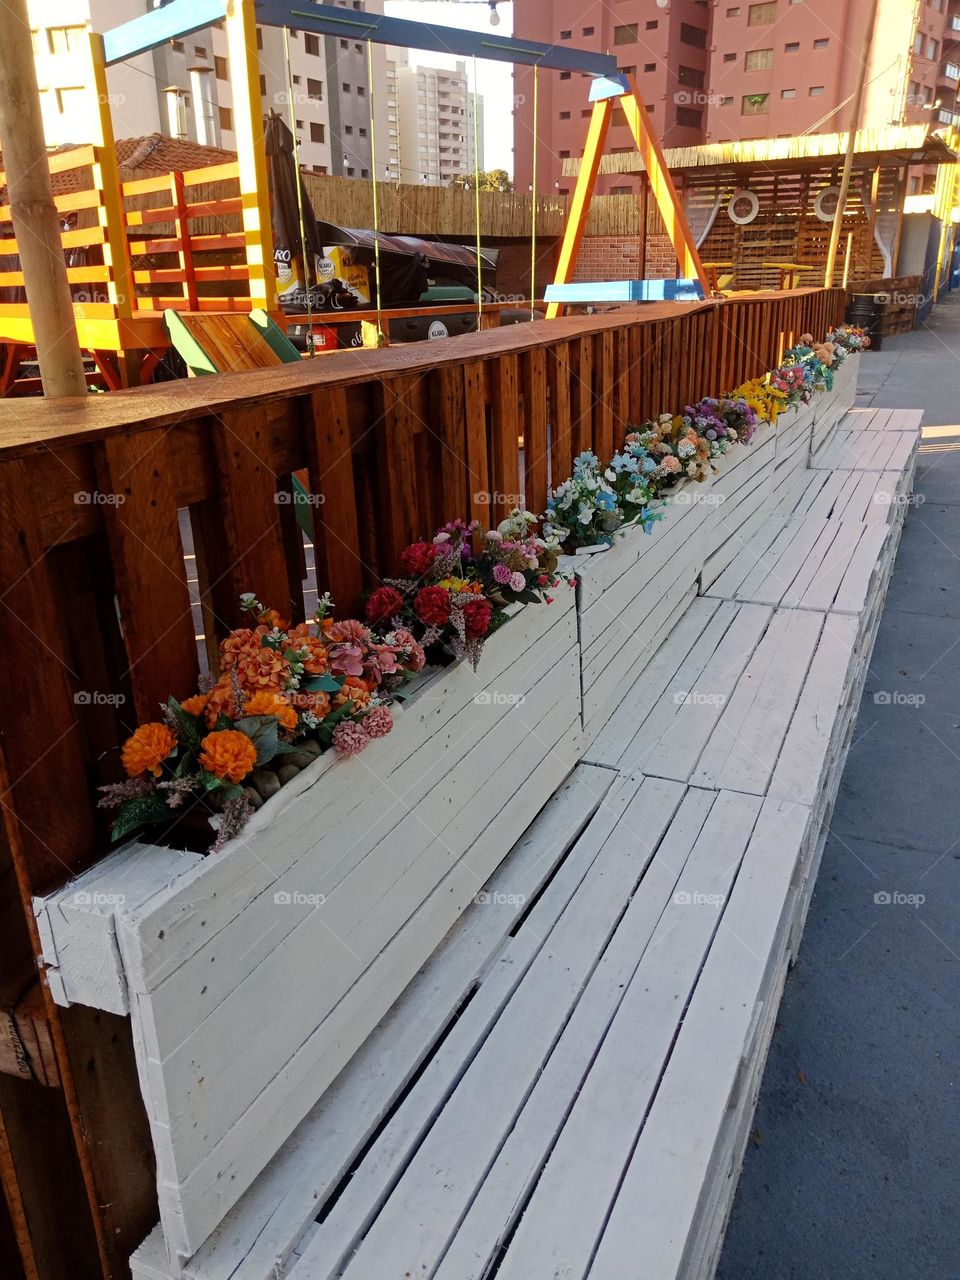 Flowers on benches made of crates. Waiting place in front of a restaurant